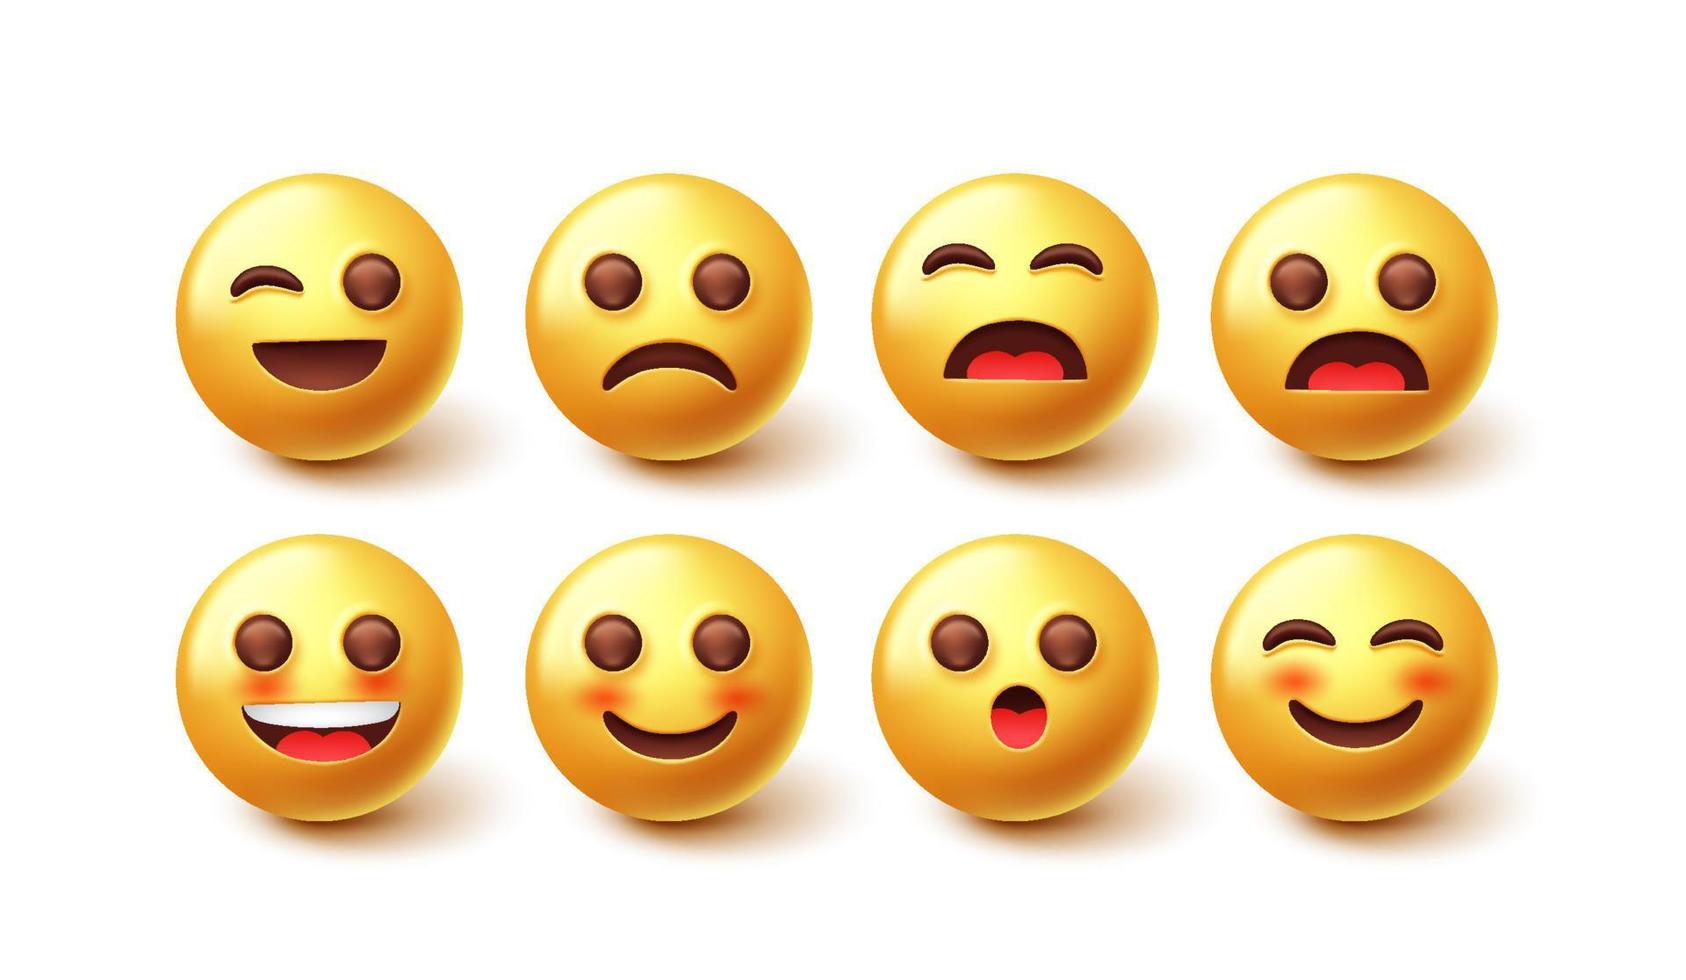 Emojis characters vector set. 3d emoticon design collection with facial emotion expression isolated in white background for graphic emojis elements. Vector illustration.